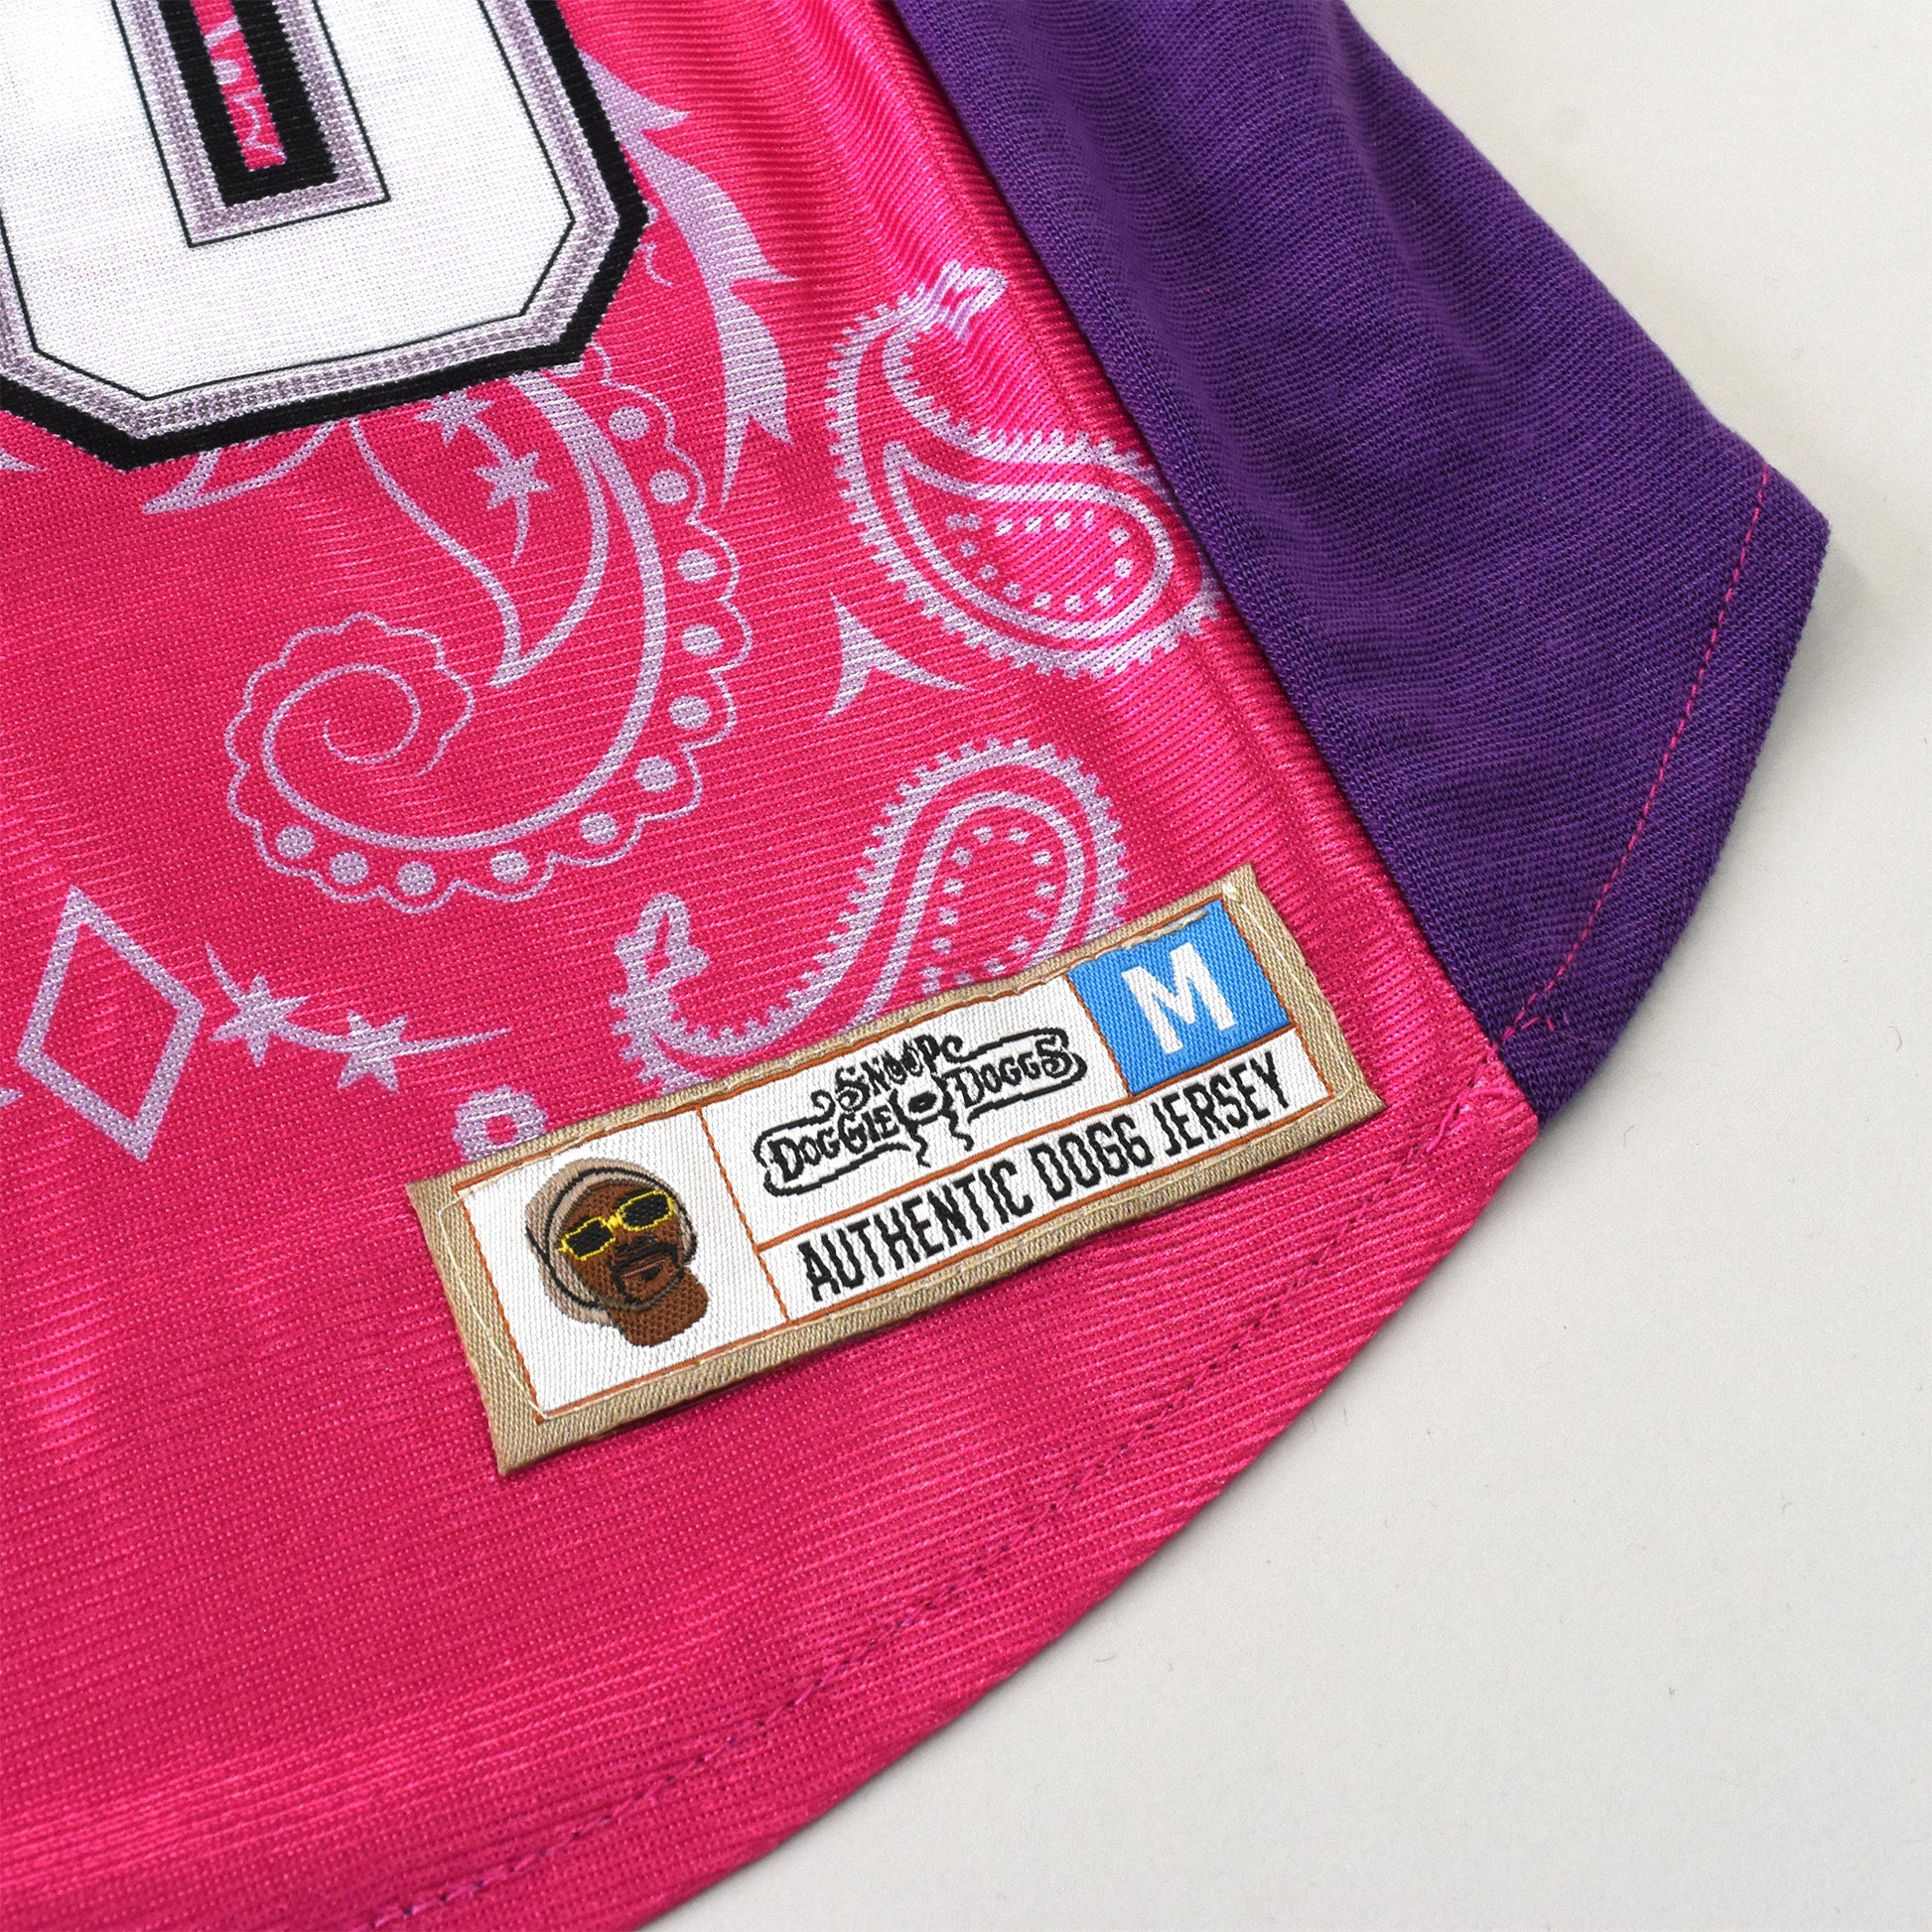 A close up detail image showing design sublimation, stretch fabric, and embroidered jersey tag of the Boss Lady Deluxe Pet Jersey.